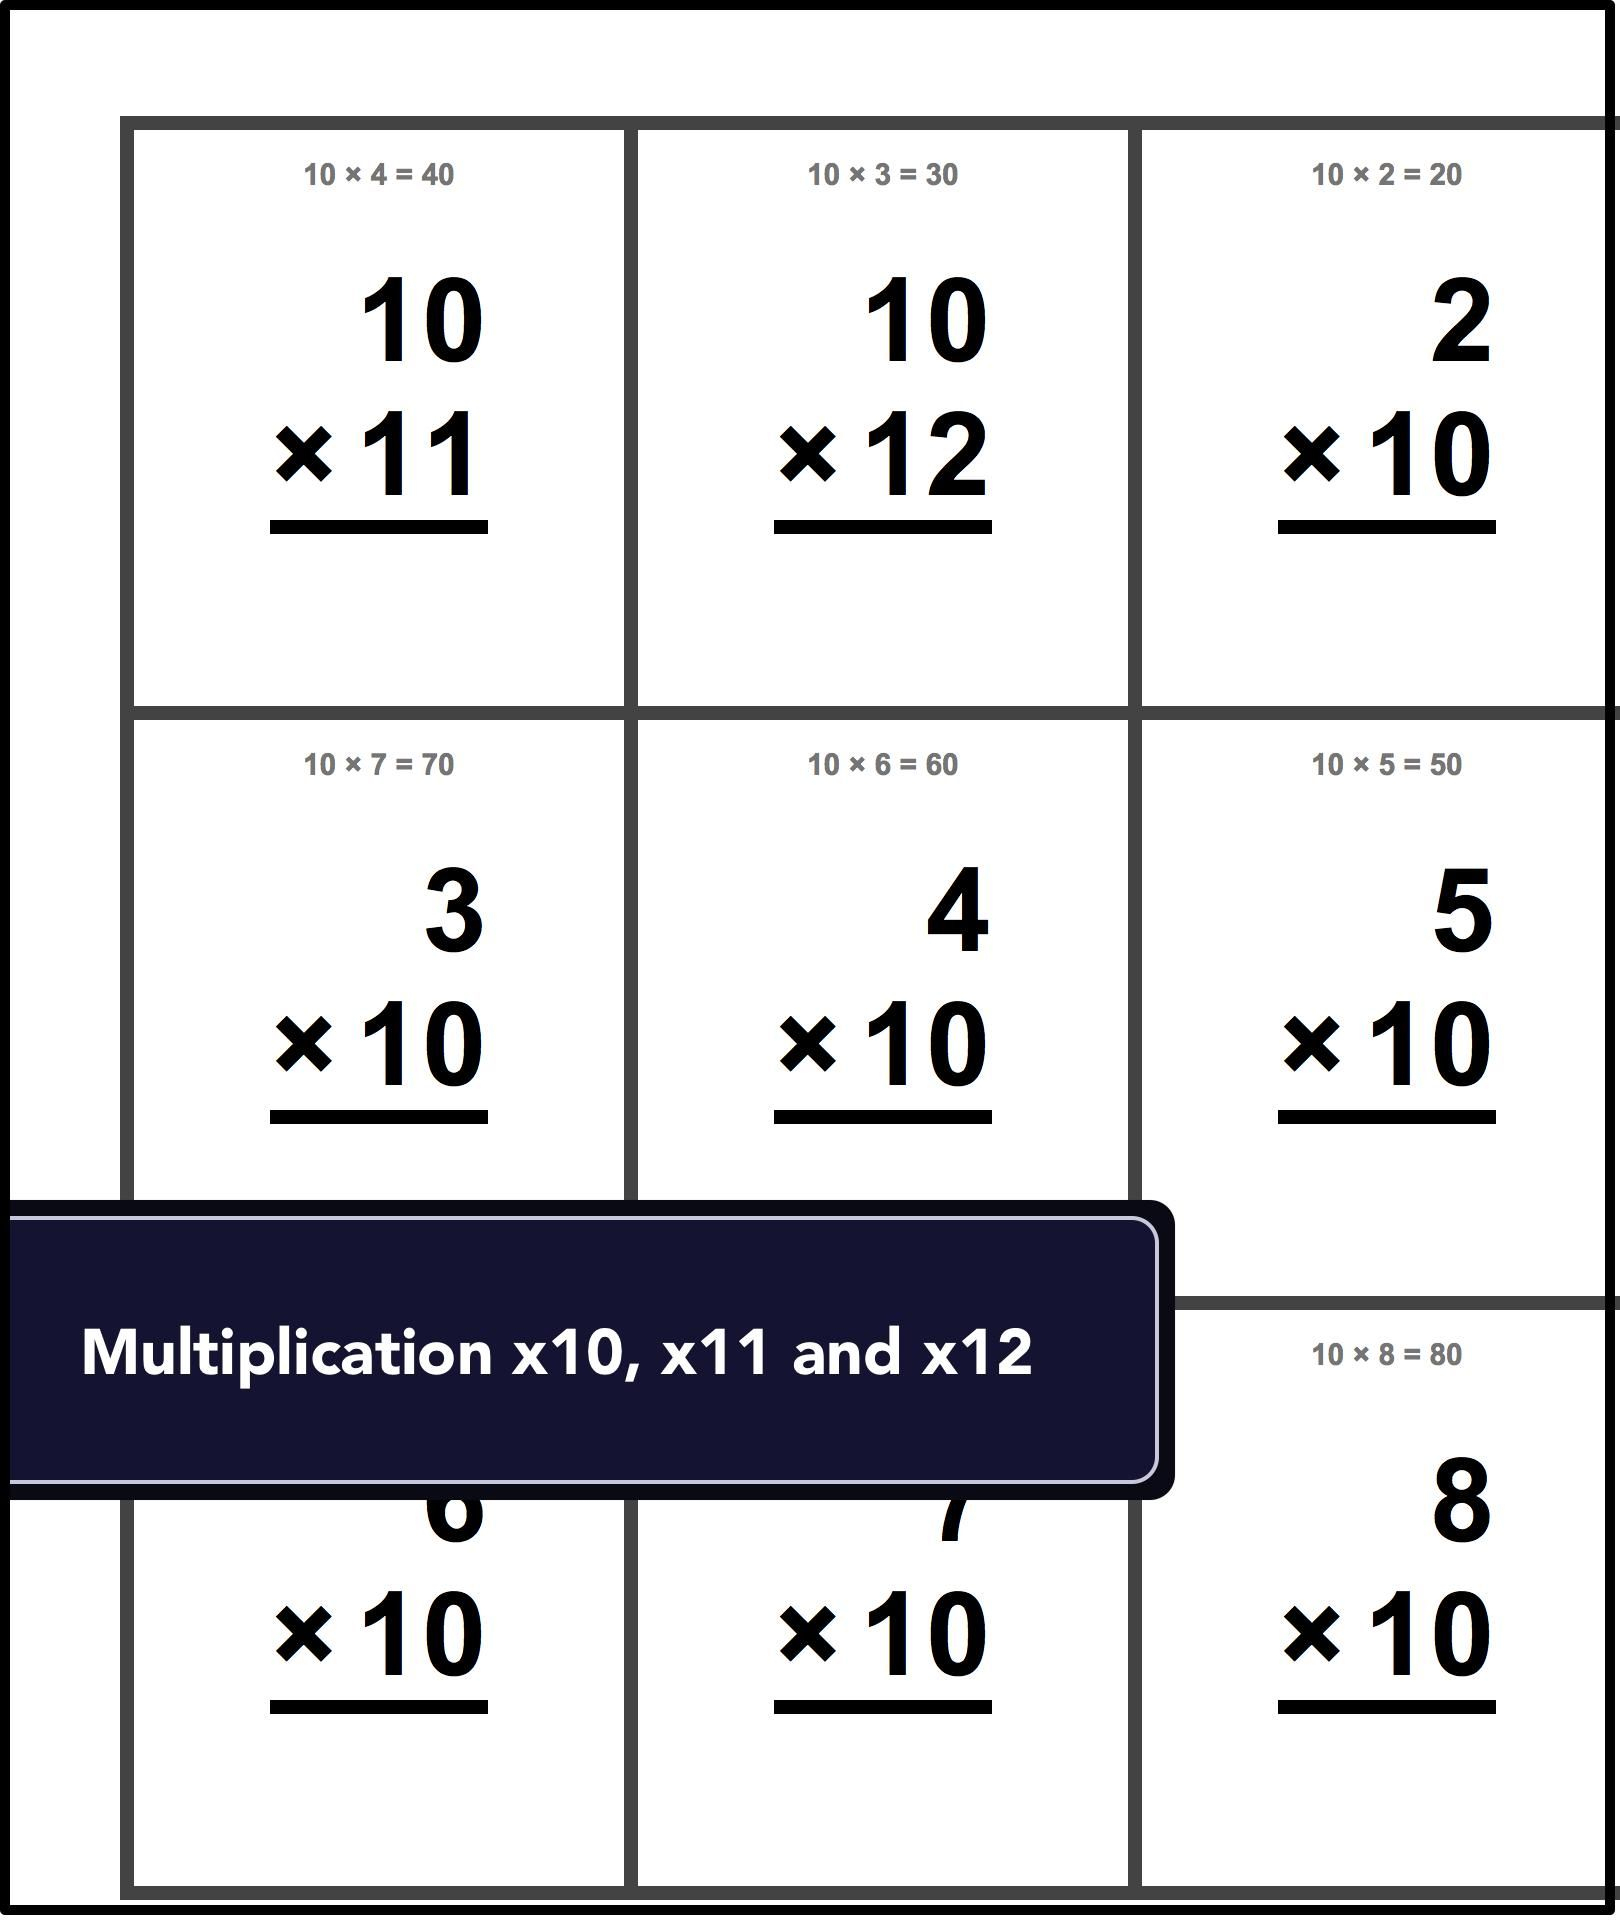 Division Flash Cards Printable